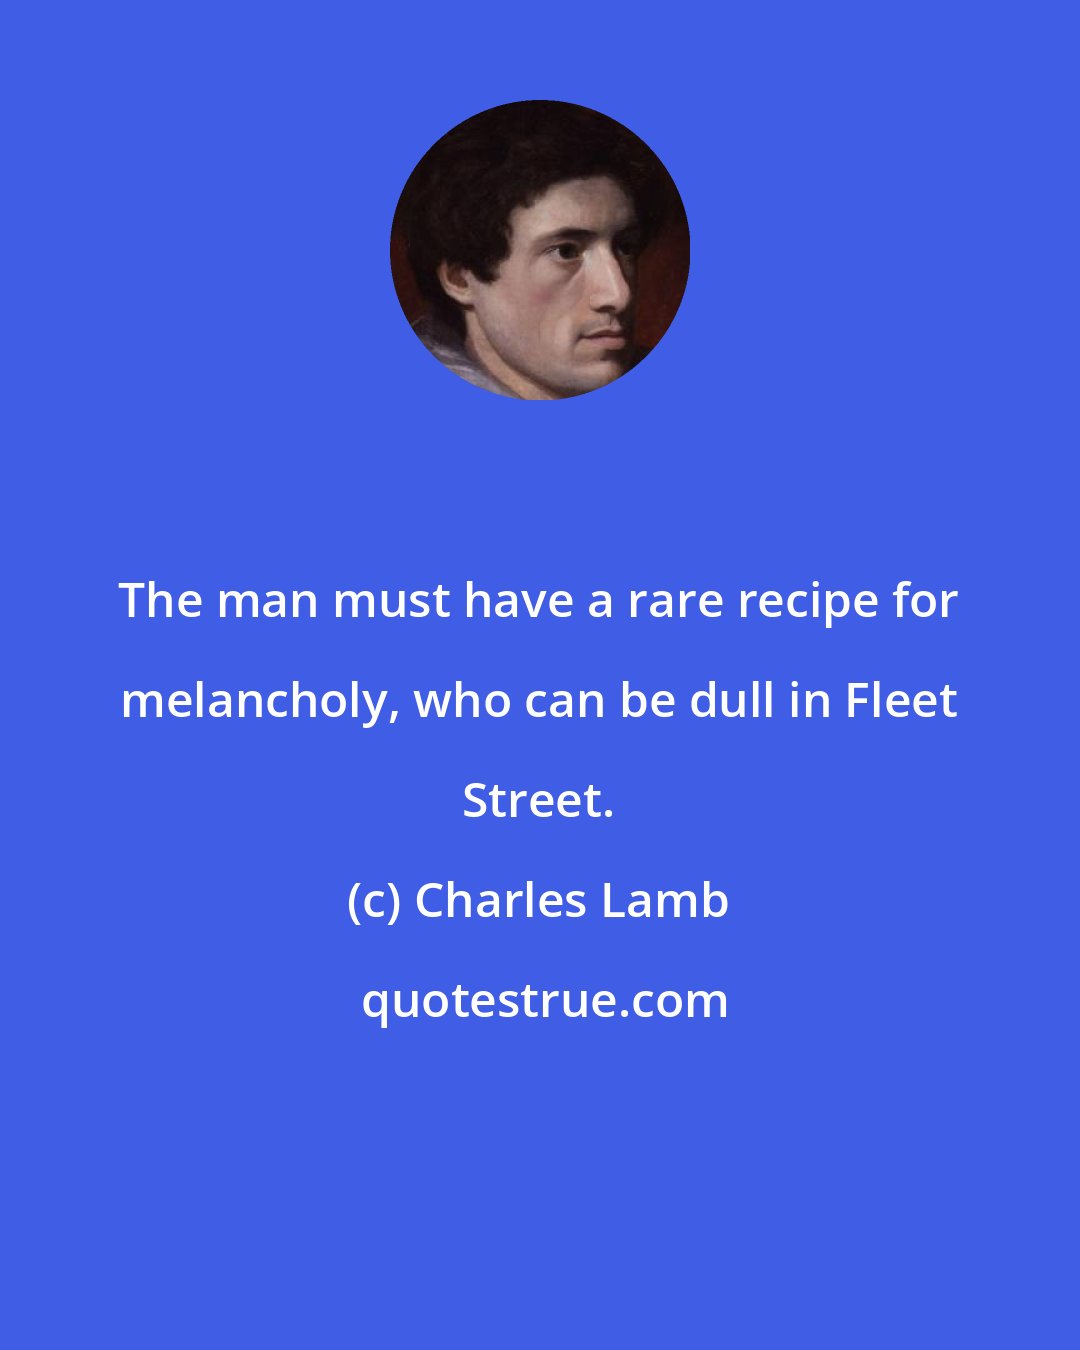 Charles Lamb: The man must have a rare recipe for melancholy, who can be dull in Fleet Street.